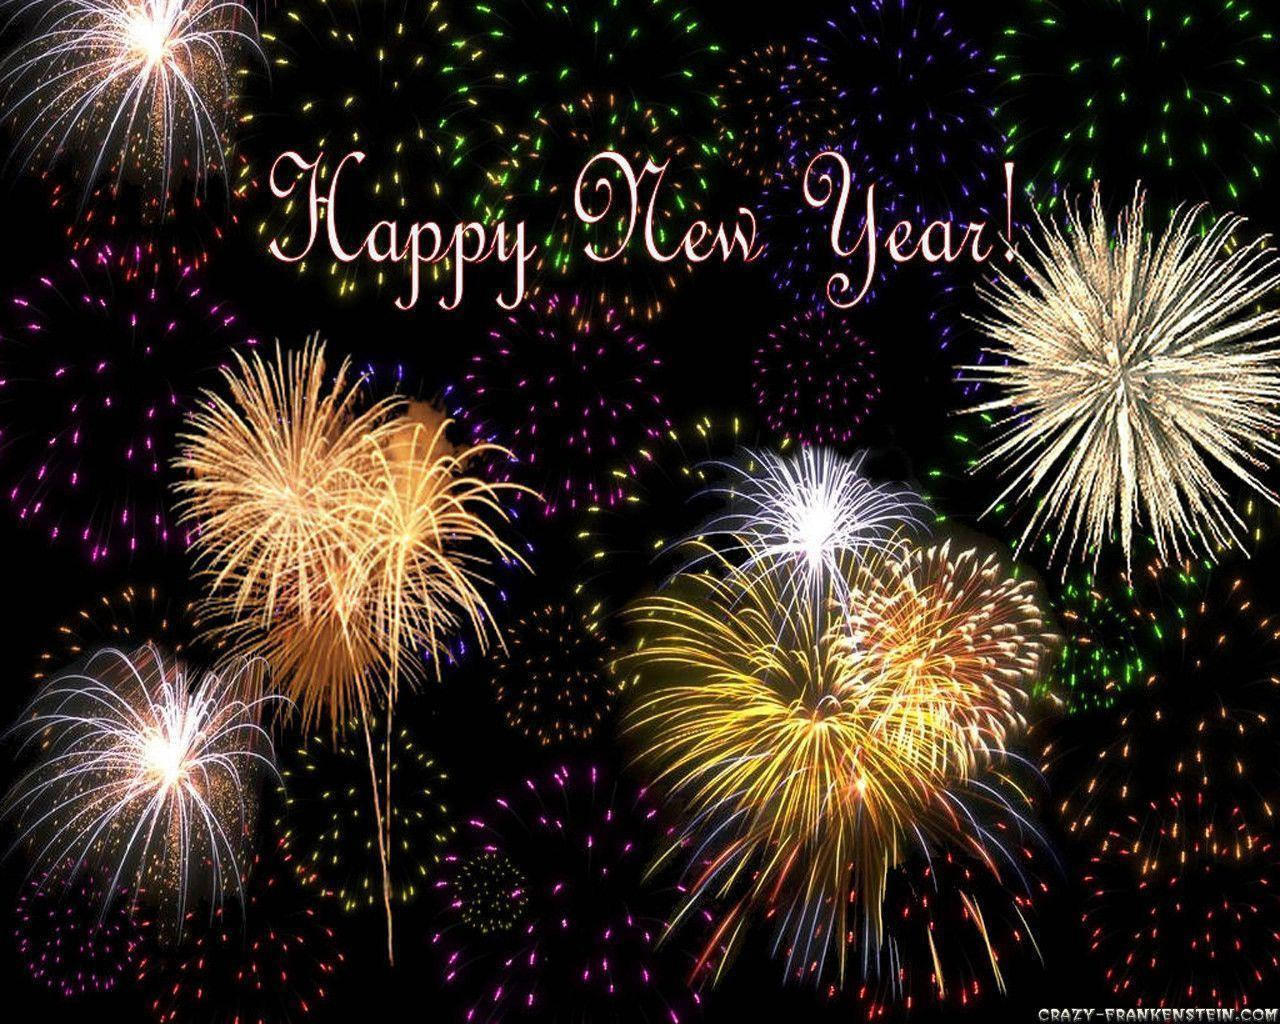 Celebrate Grandly With Sparkling New Year Fireworks Wallpaper